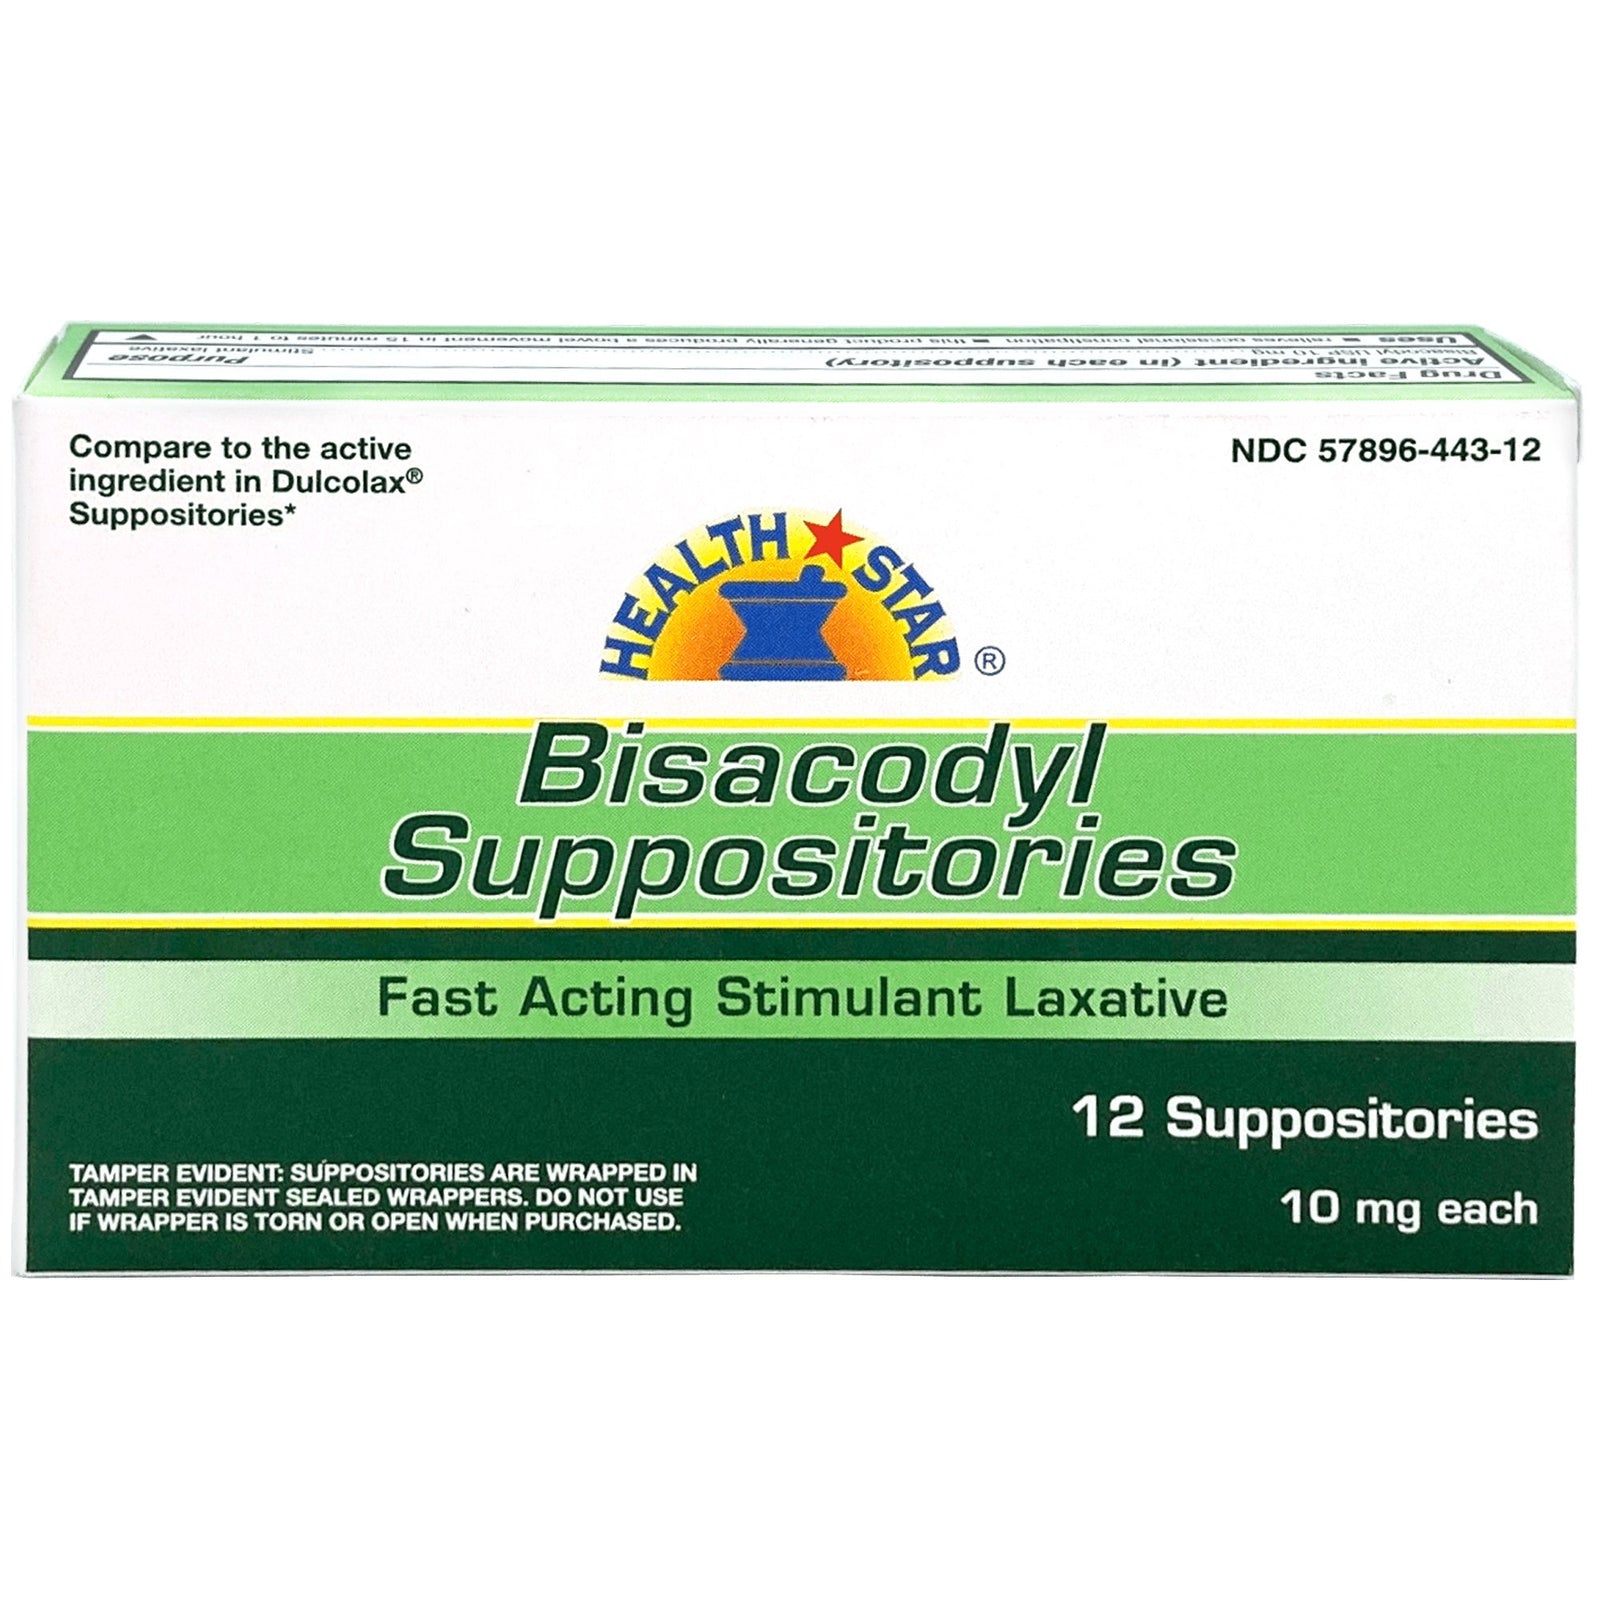  Bisacodyl Suppositories, 10 mg, Box of 100's Made in